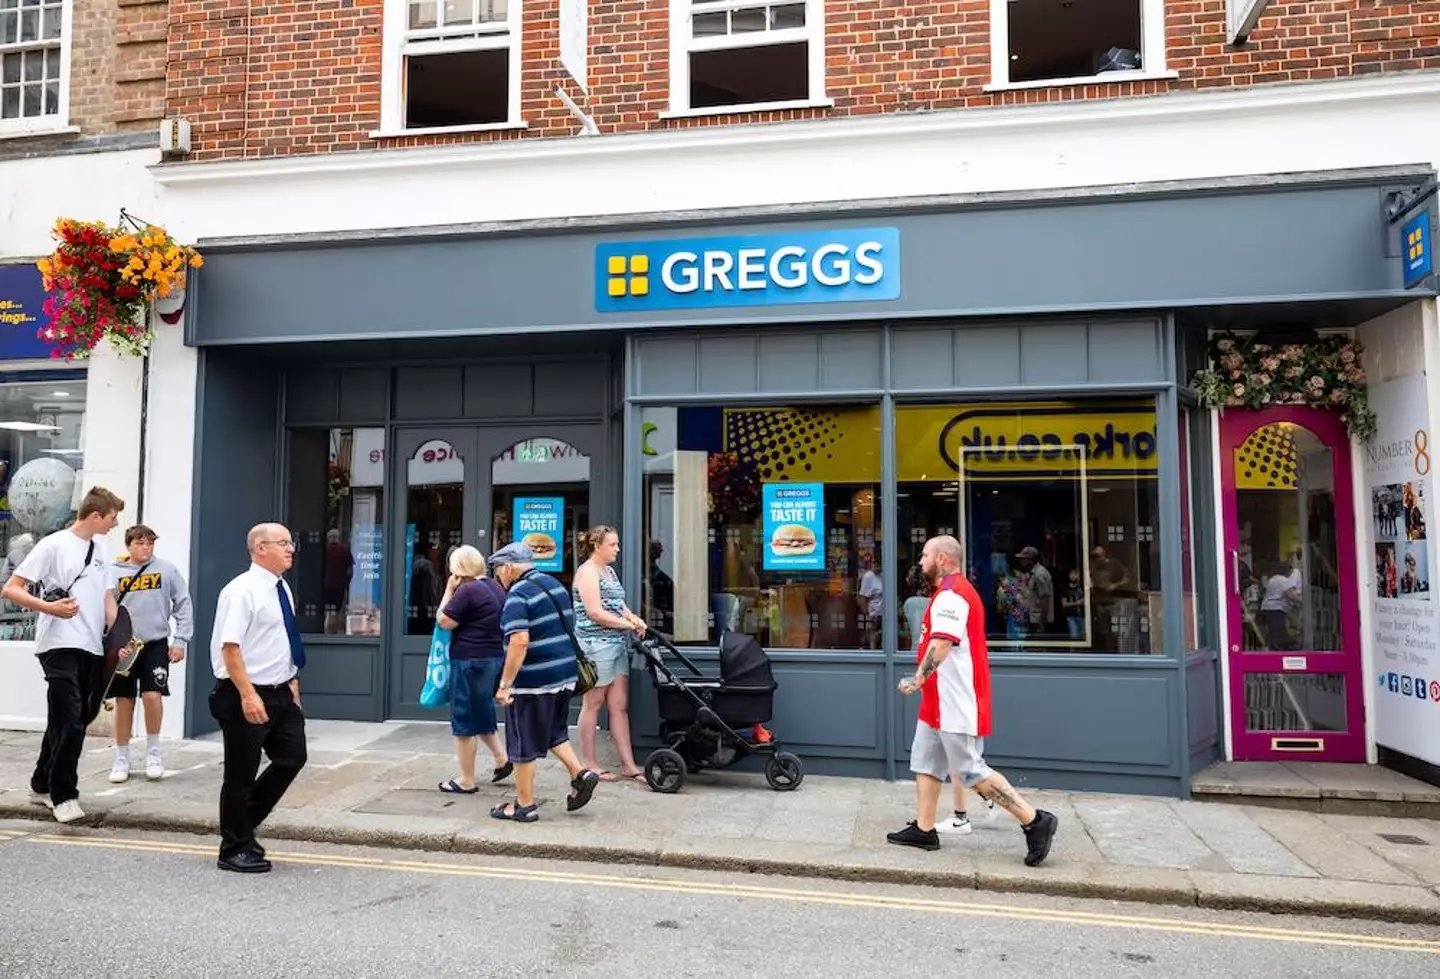 Greggs' new store nearly is ready to open in Truro.